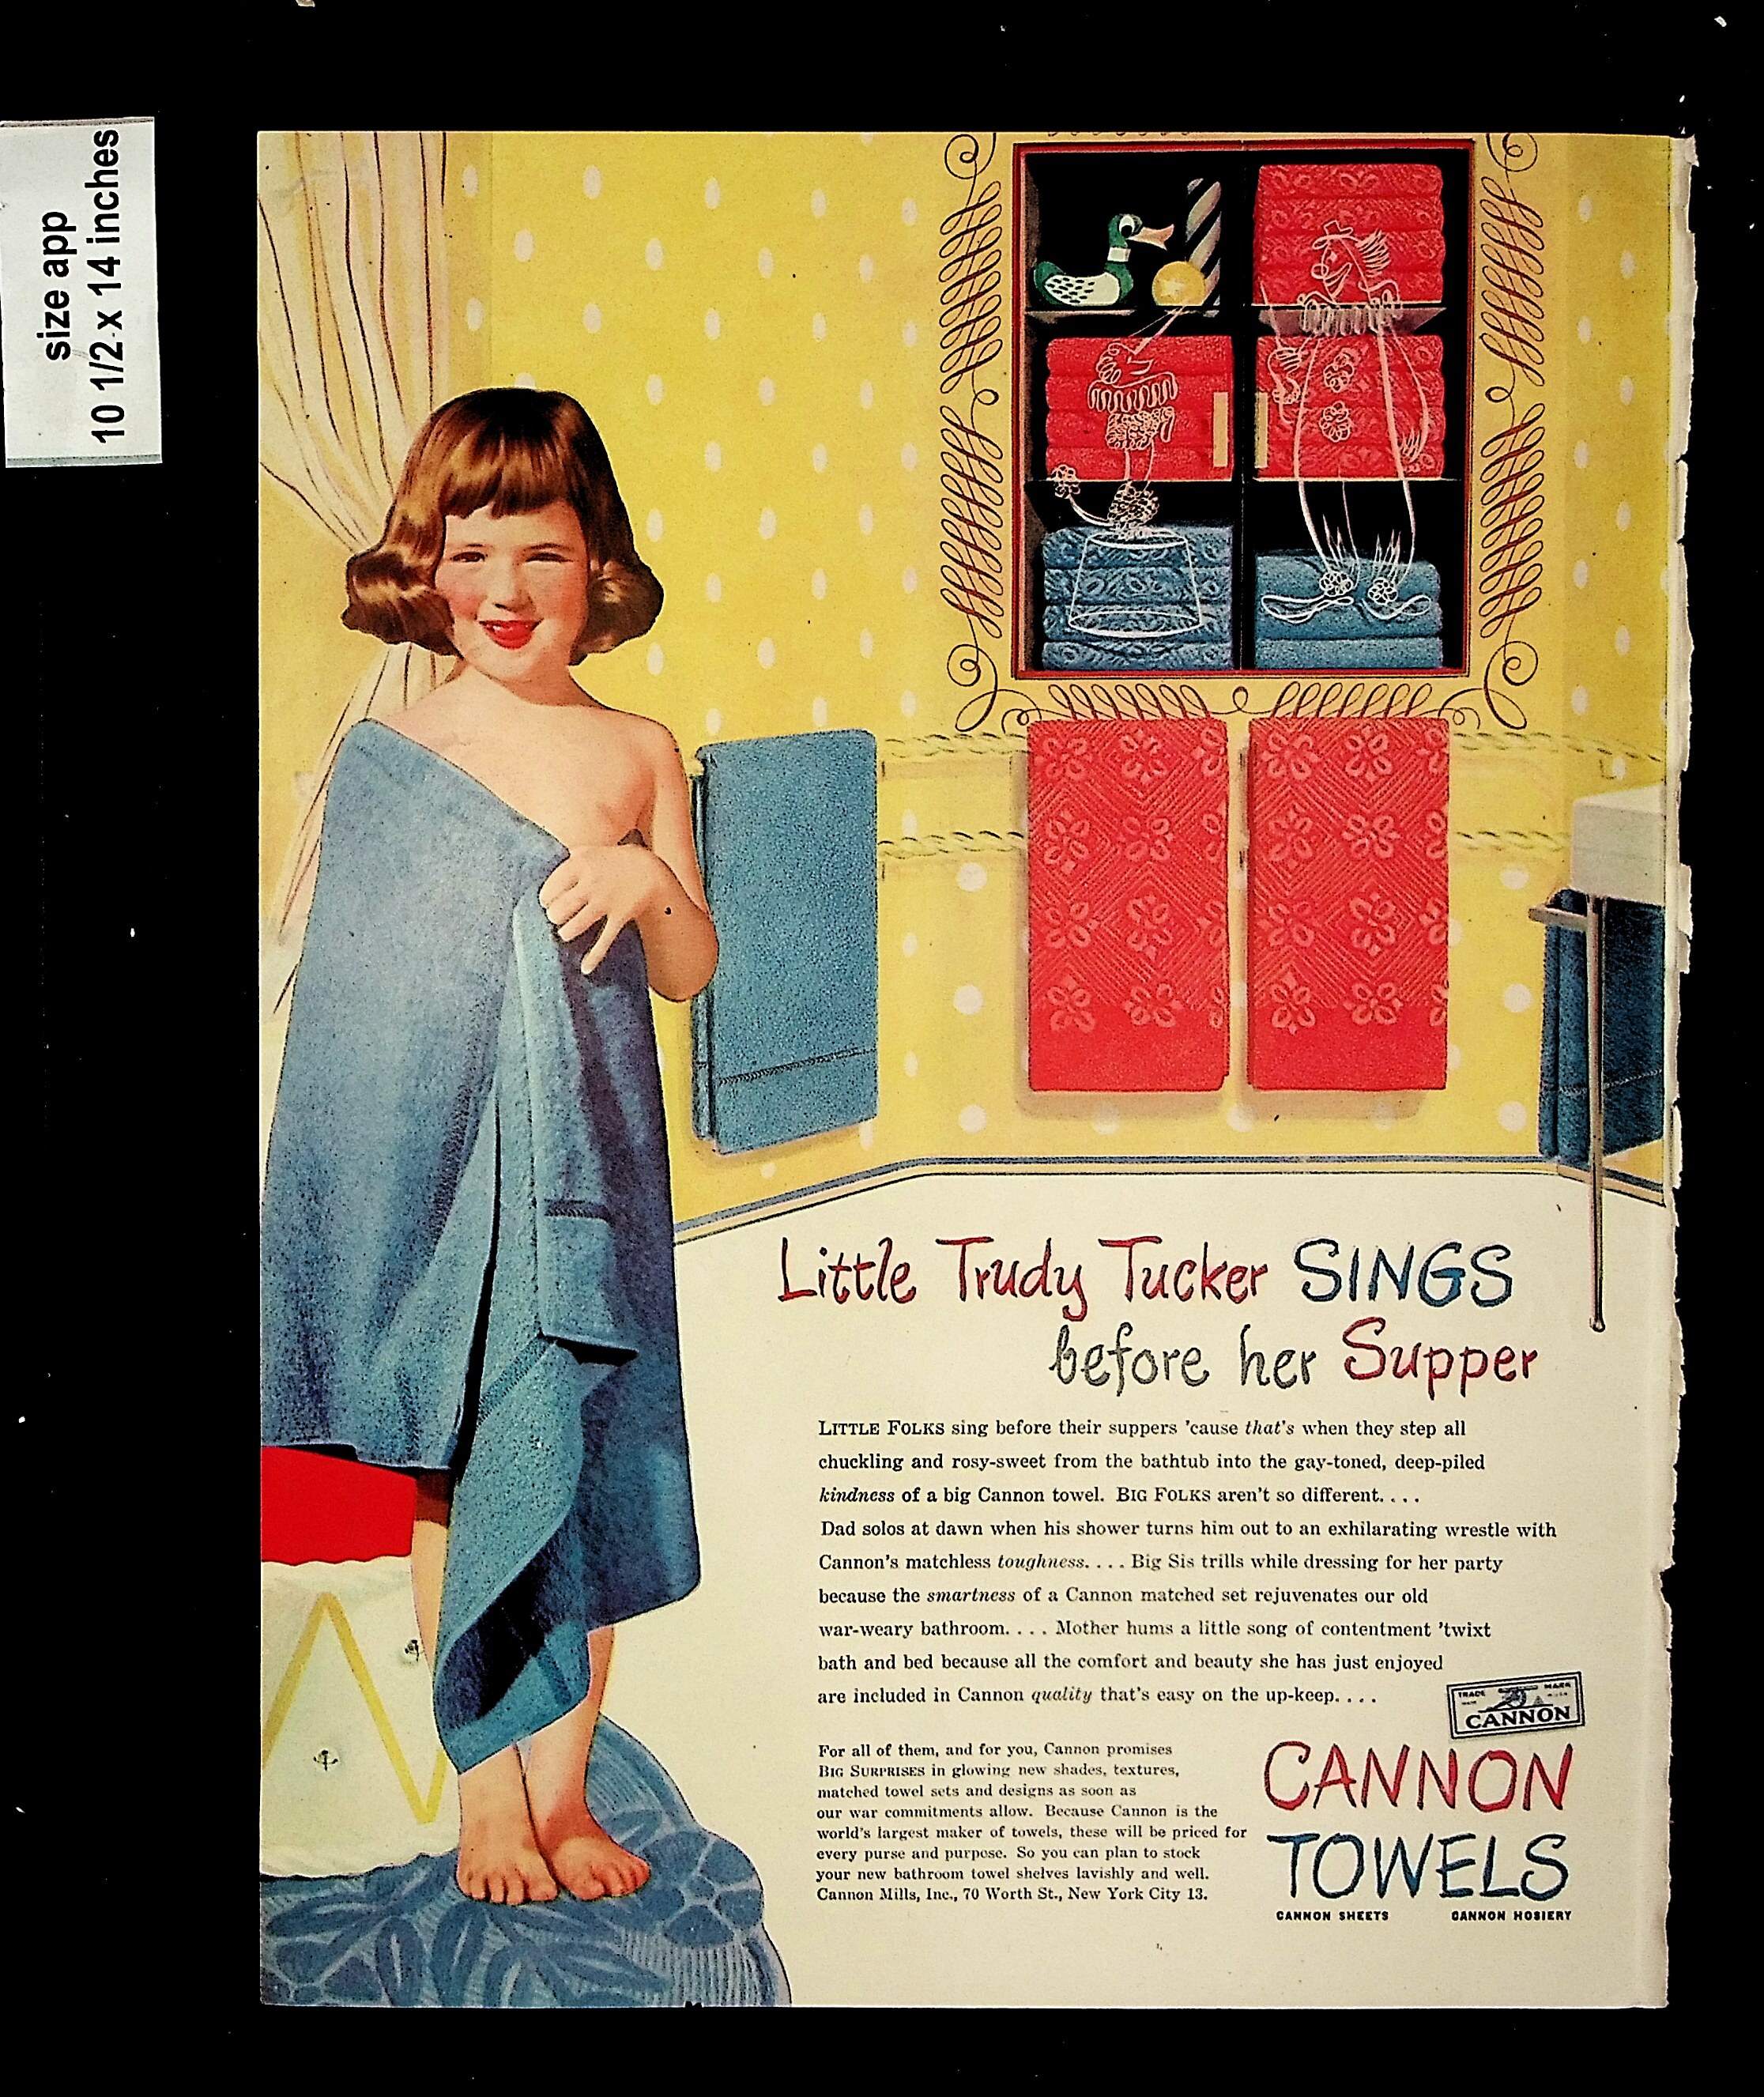 1945 Cannon Towels Little Trudy Tucker Vintage Print Ad 9938